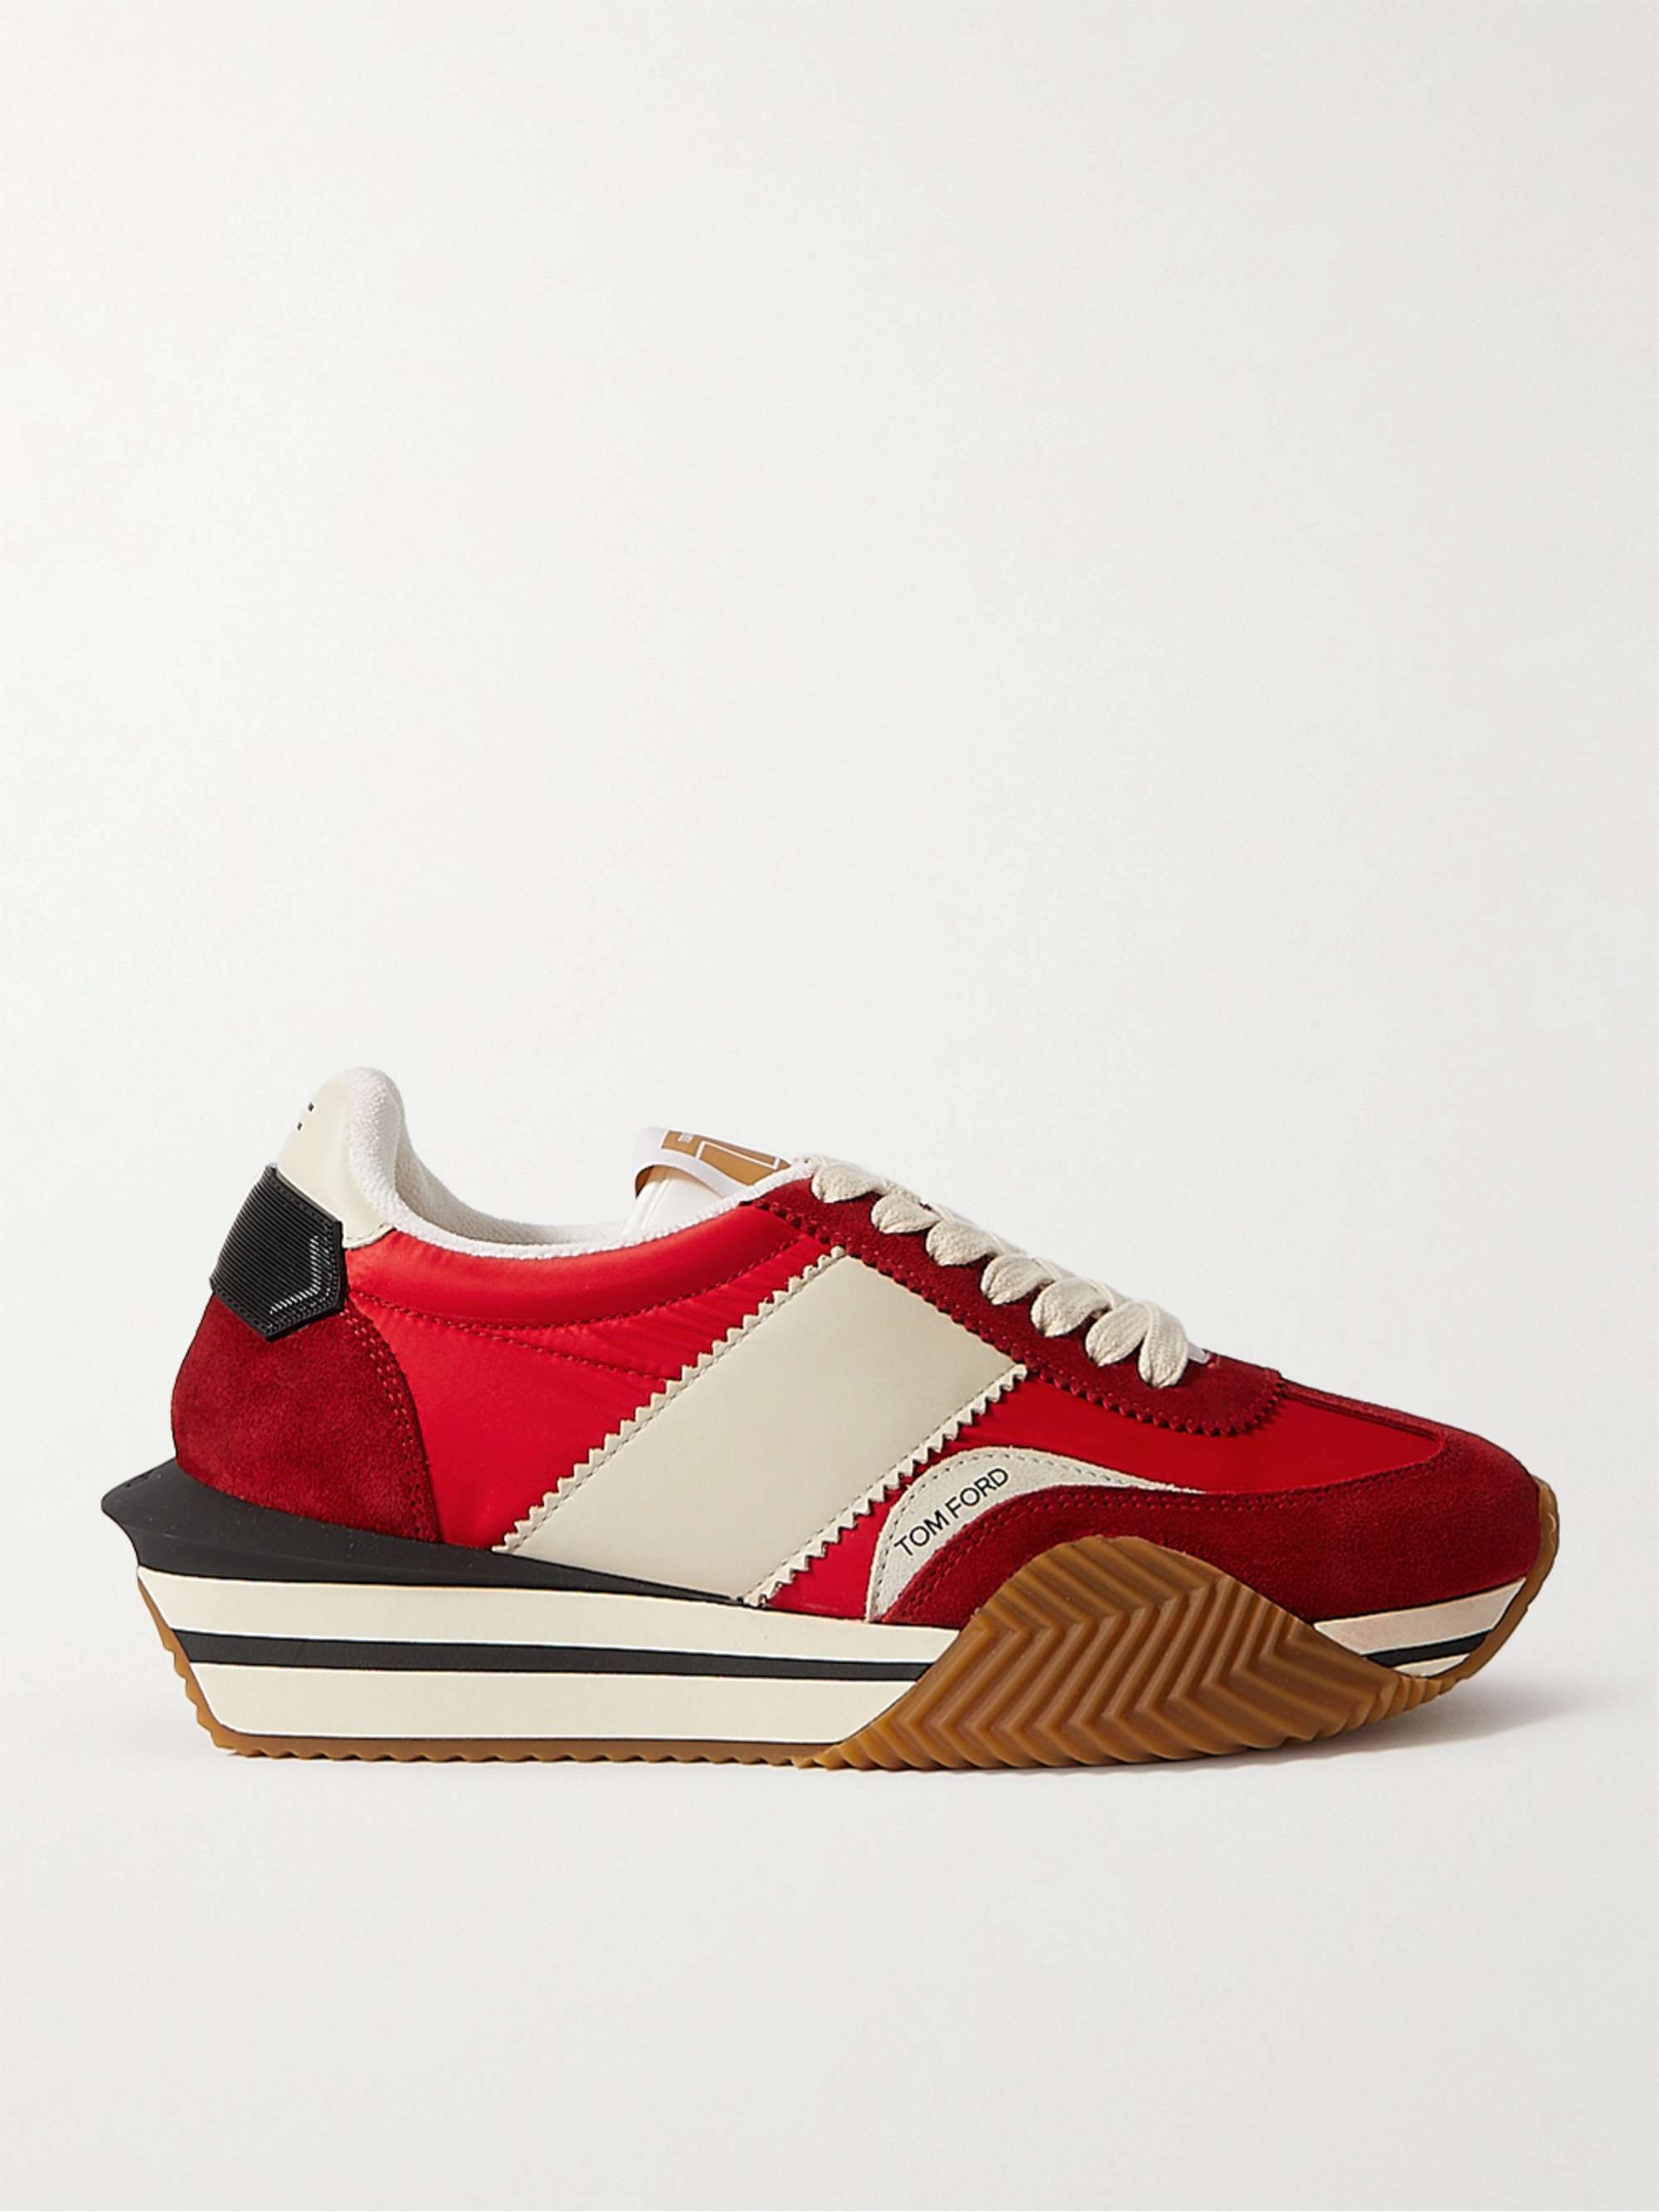 TOM FORD James Leather-Trimmed Nylon and Suede Sneakers